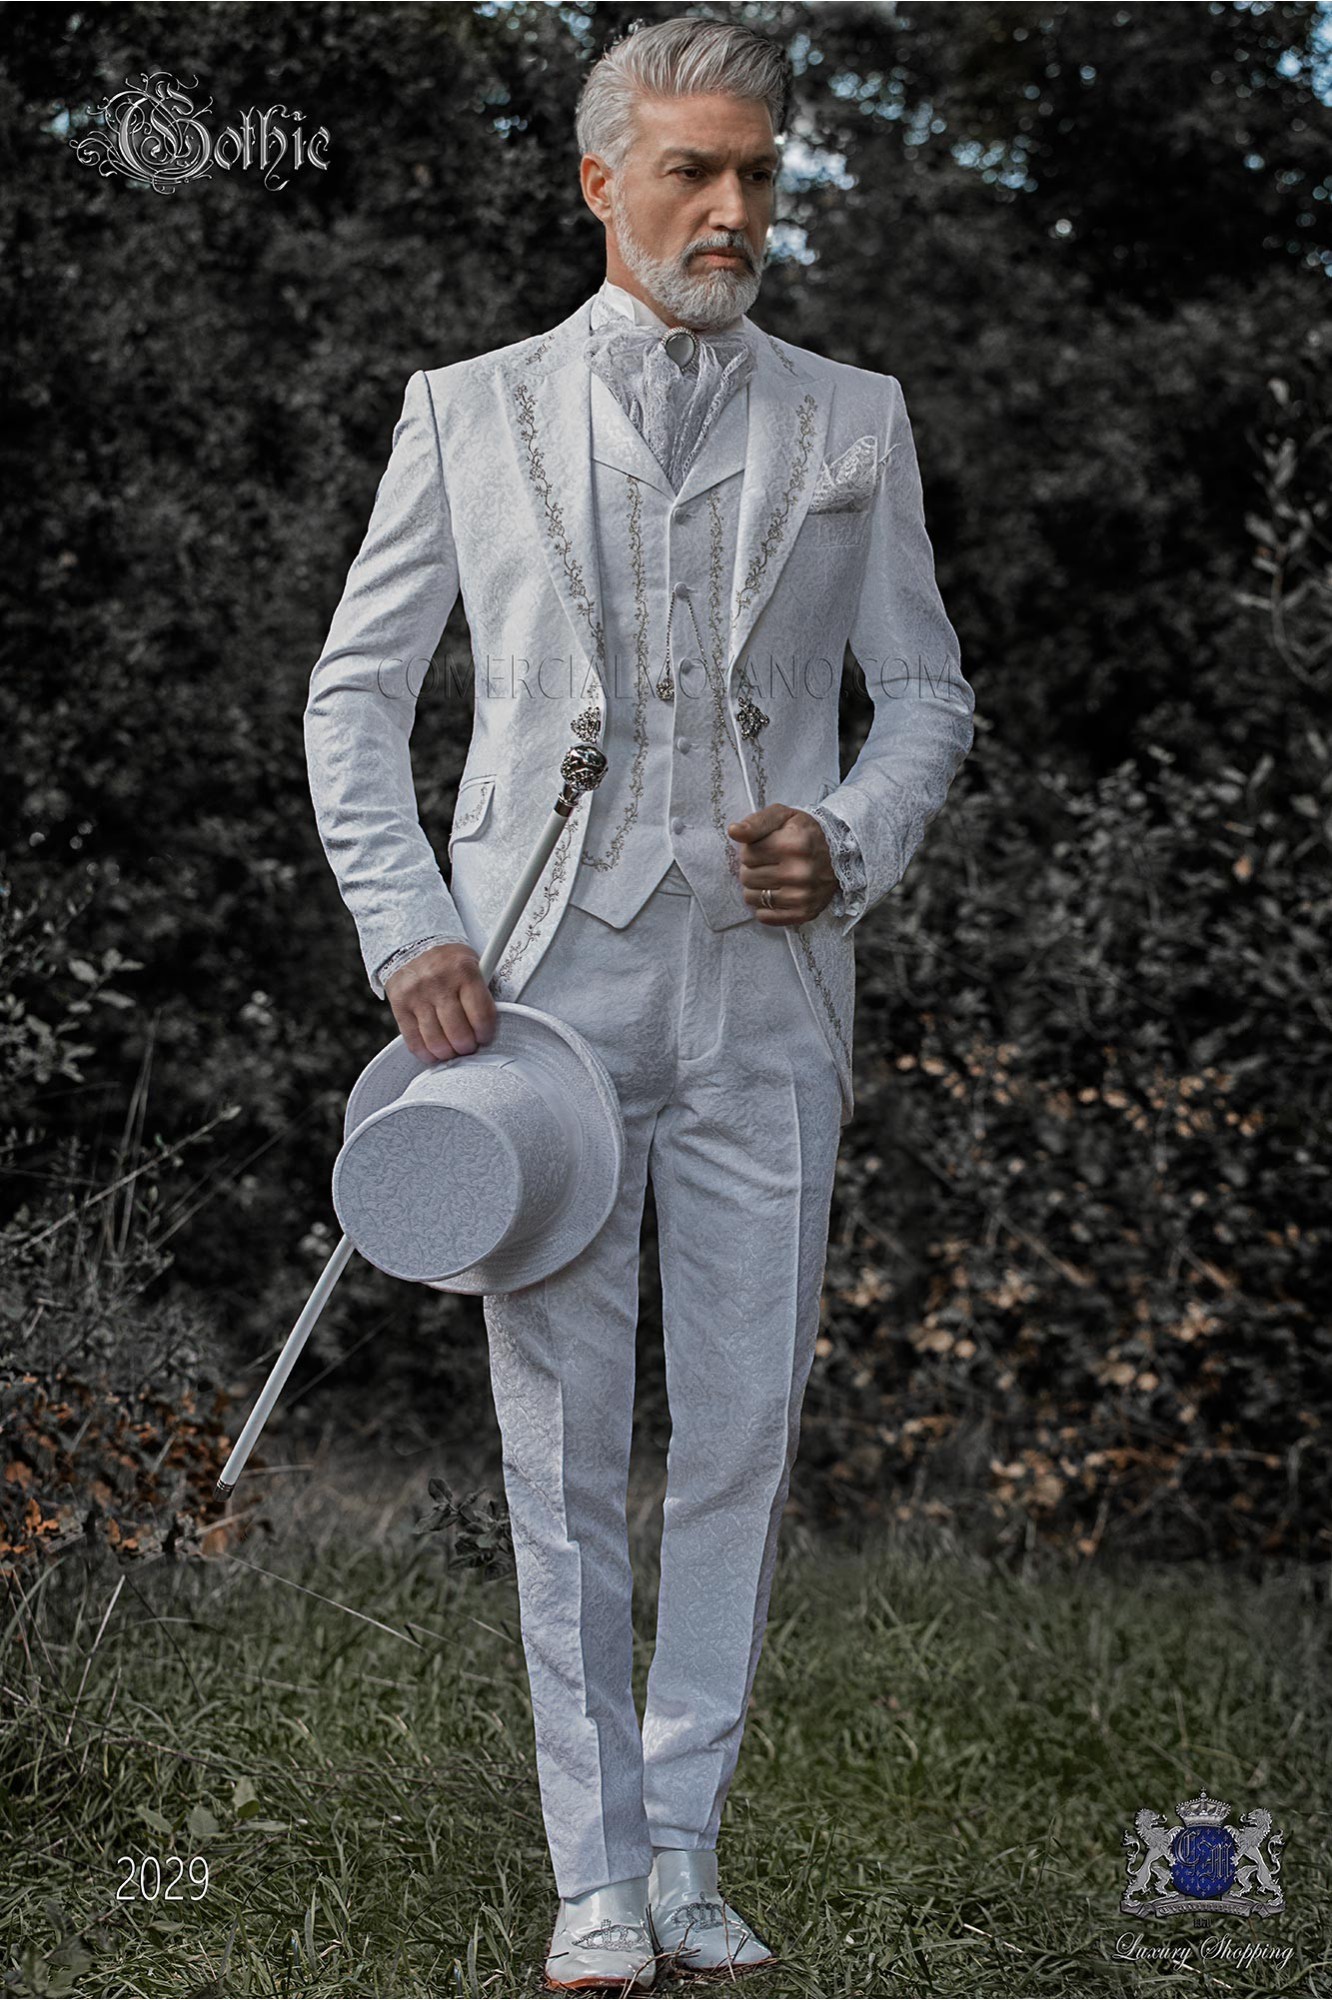 Baroque groom suit, vintage frock coat in white jacquard fabric with silver embroidery and crystal clasp